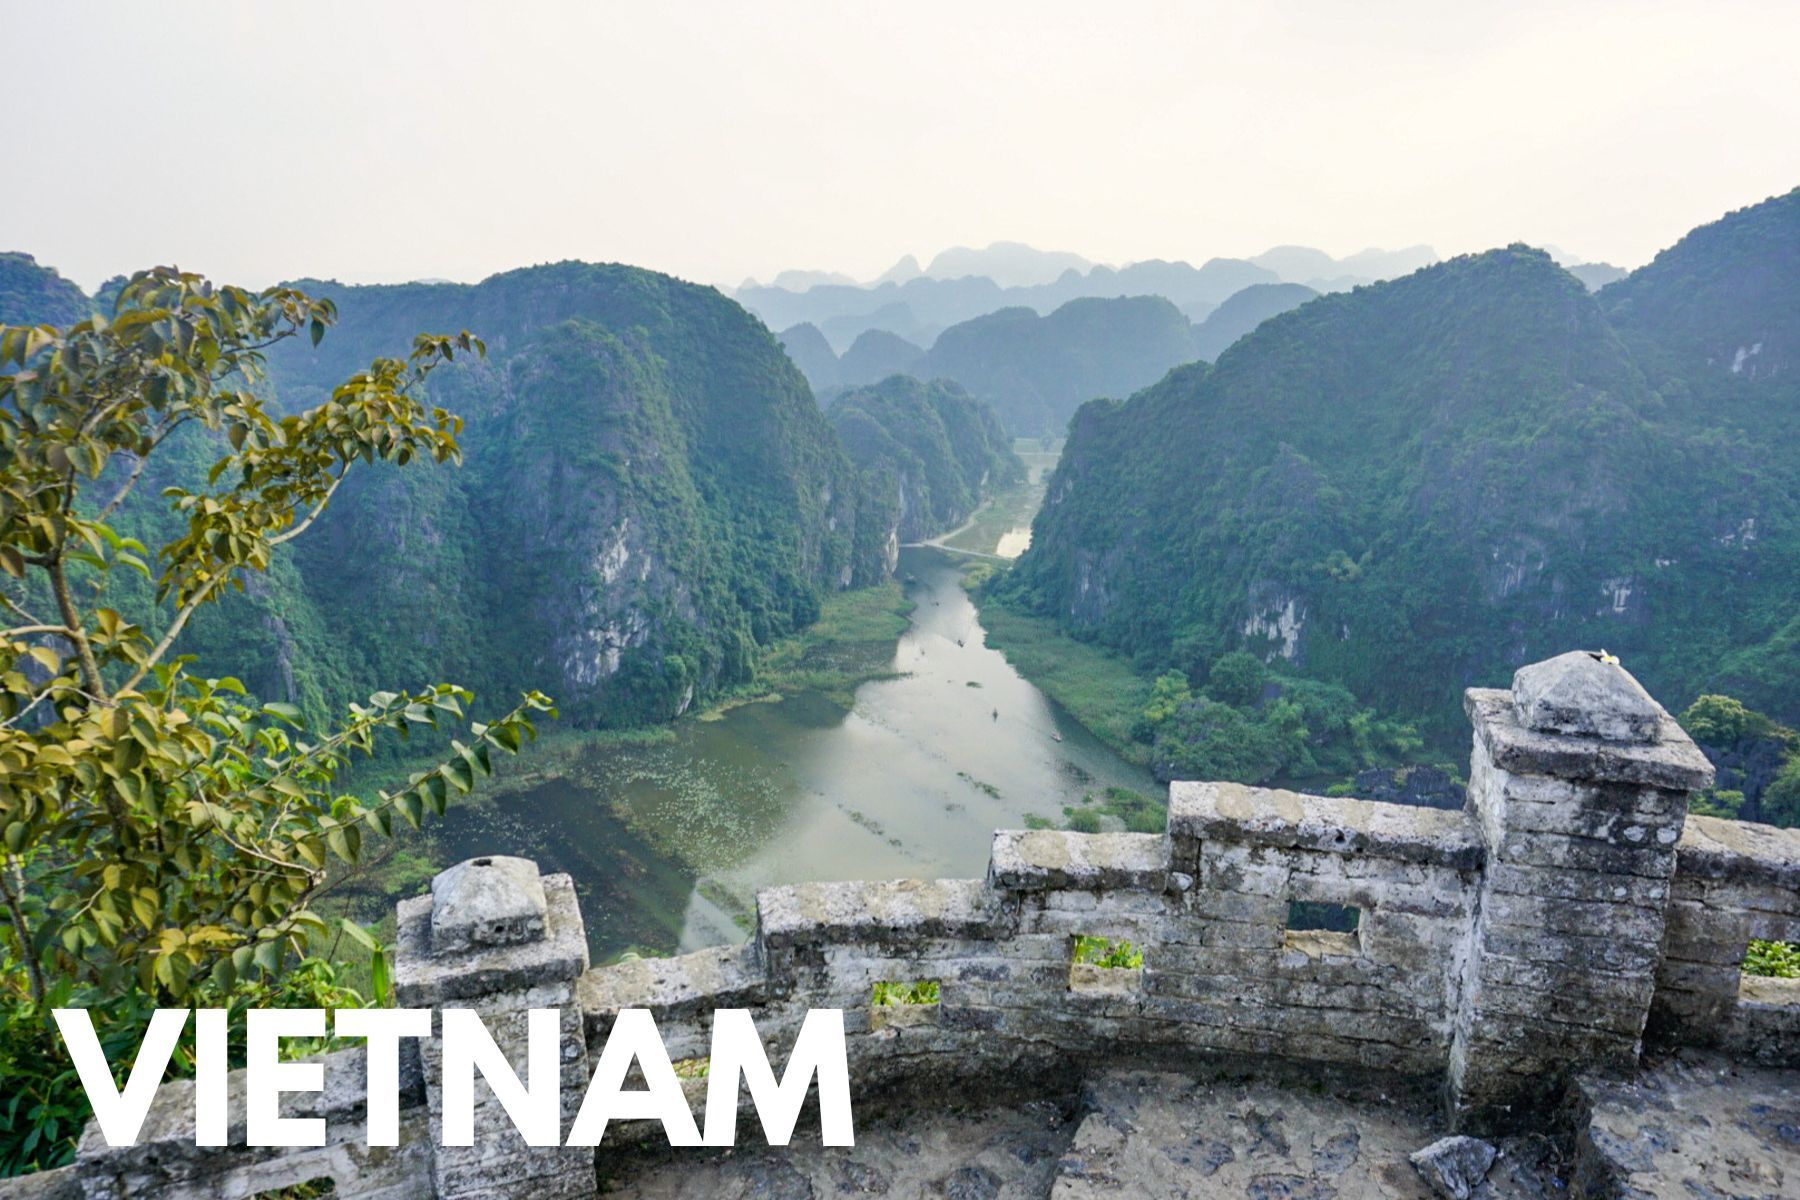 Photo of a stone staircase with a wall leading to views over a river leading between limestone karsts on a cloudy day with the word Vietnam overlaid